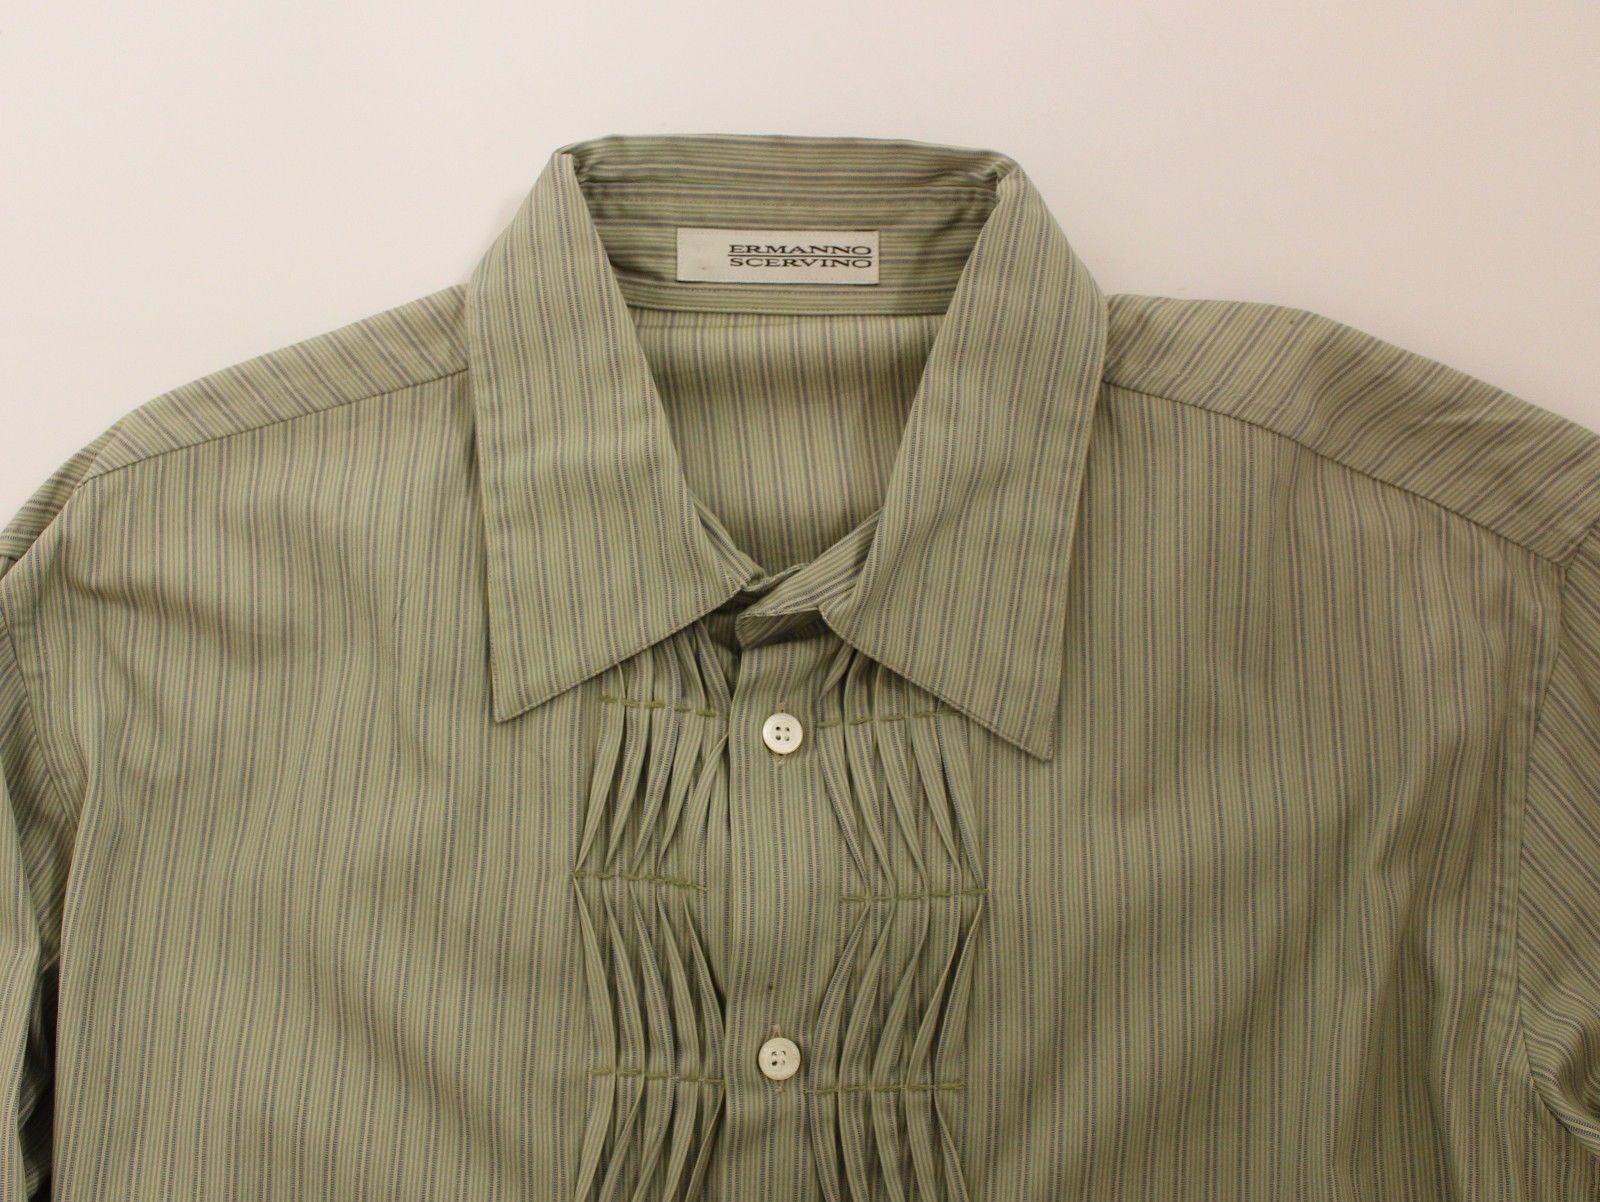 Mens Clothing Shirts Casual shirts and button-up shirts Ermanno Scervino Cotton Shirt in Green for Men 